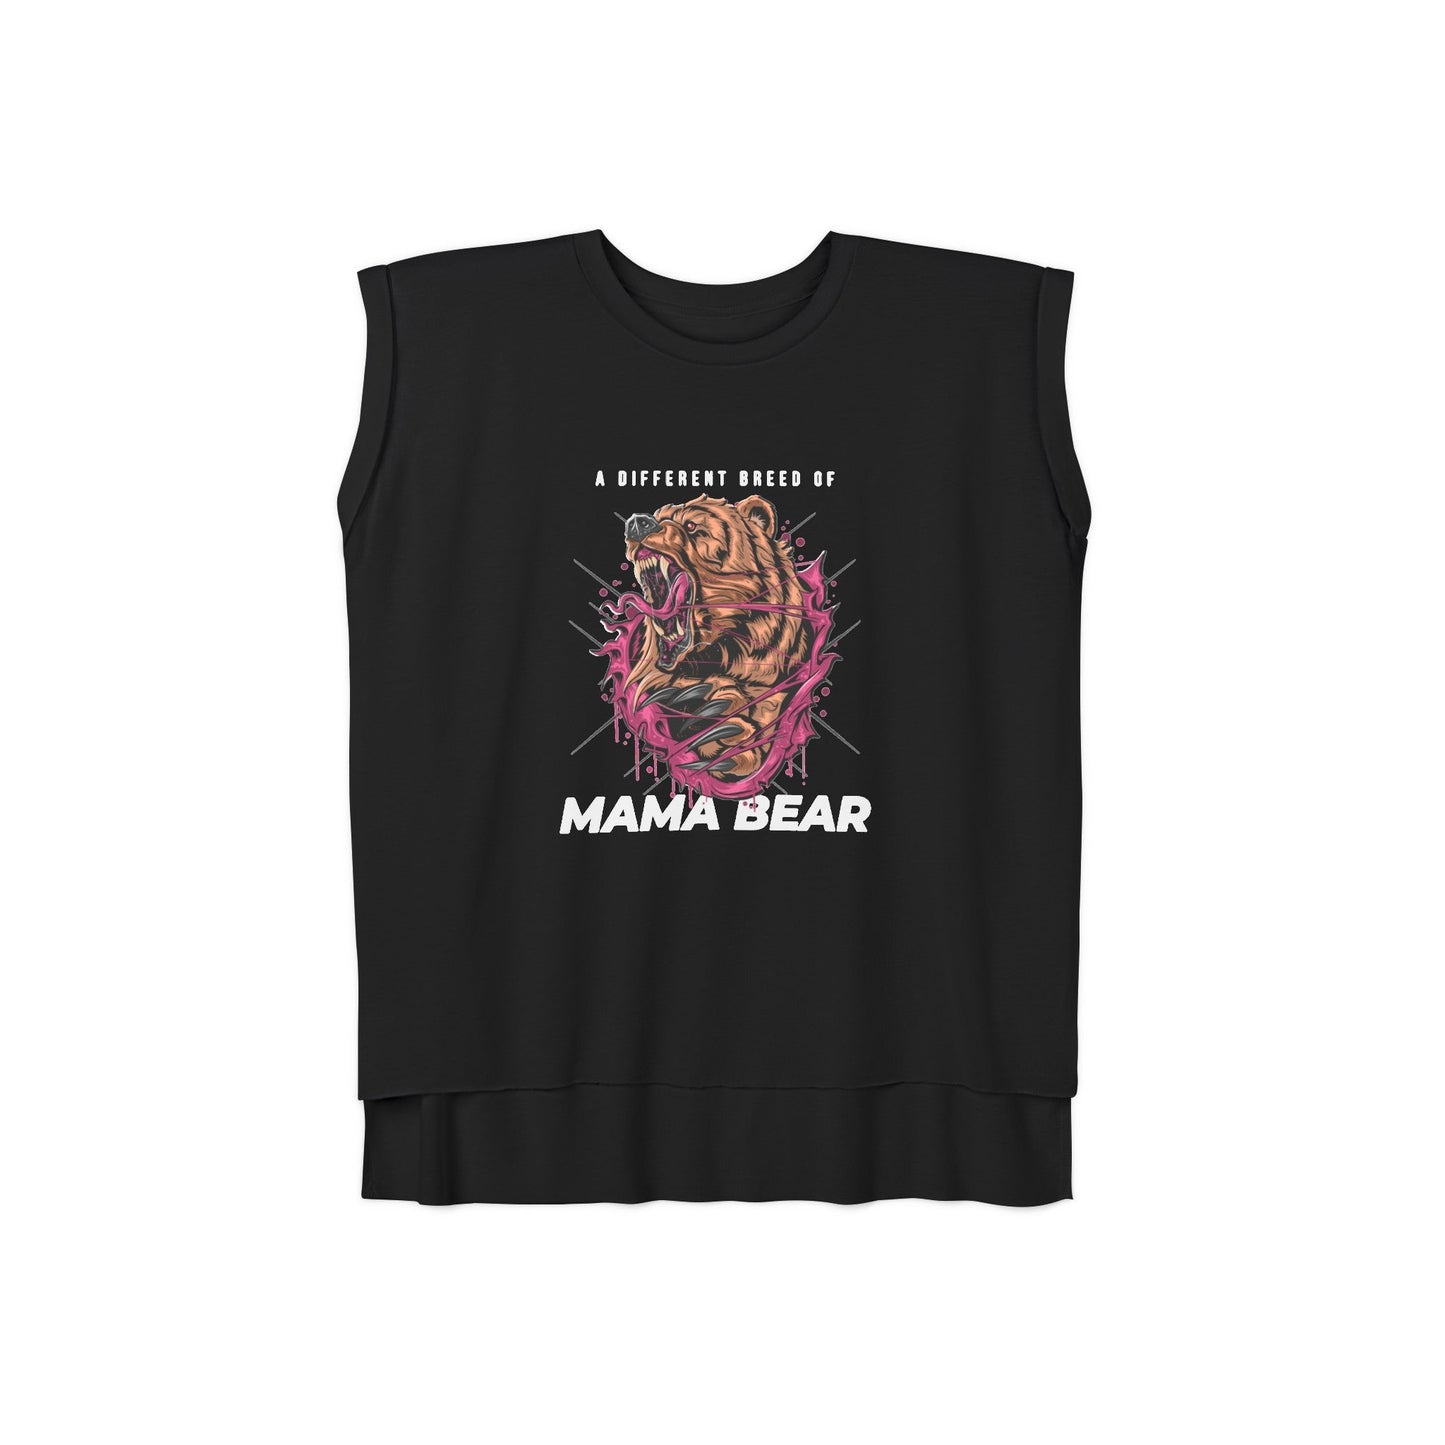 A Different Breed of Mama Bear Women’s Flowy Rolled Cuffs Muscle Tee | Mothers Day